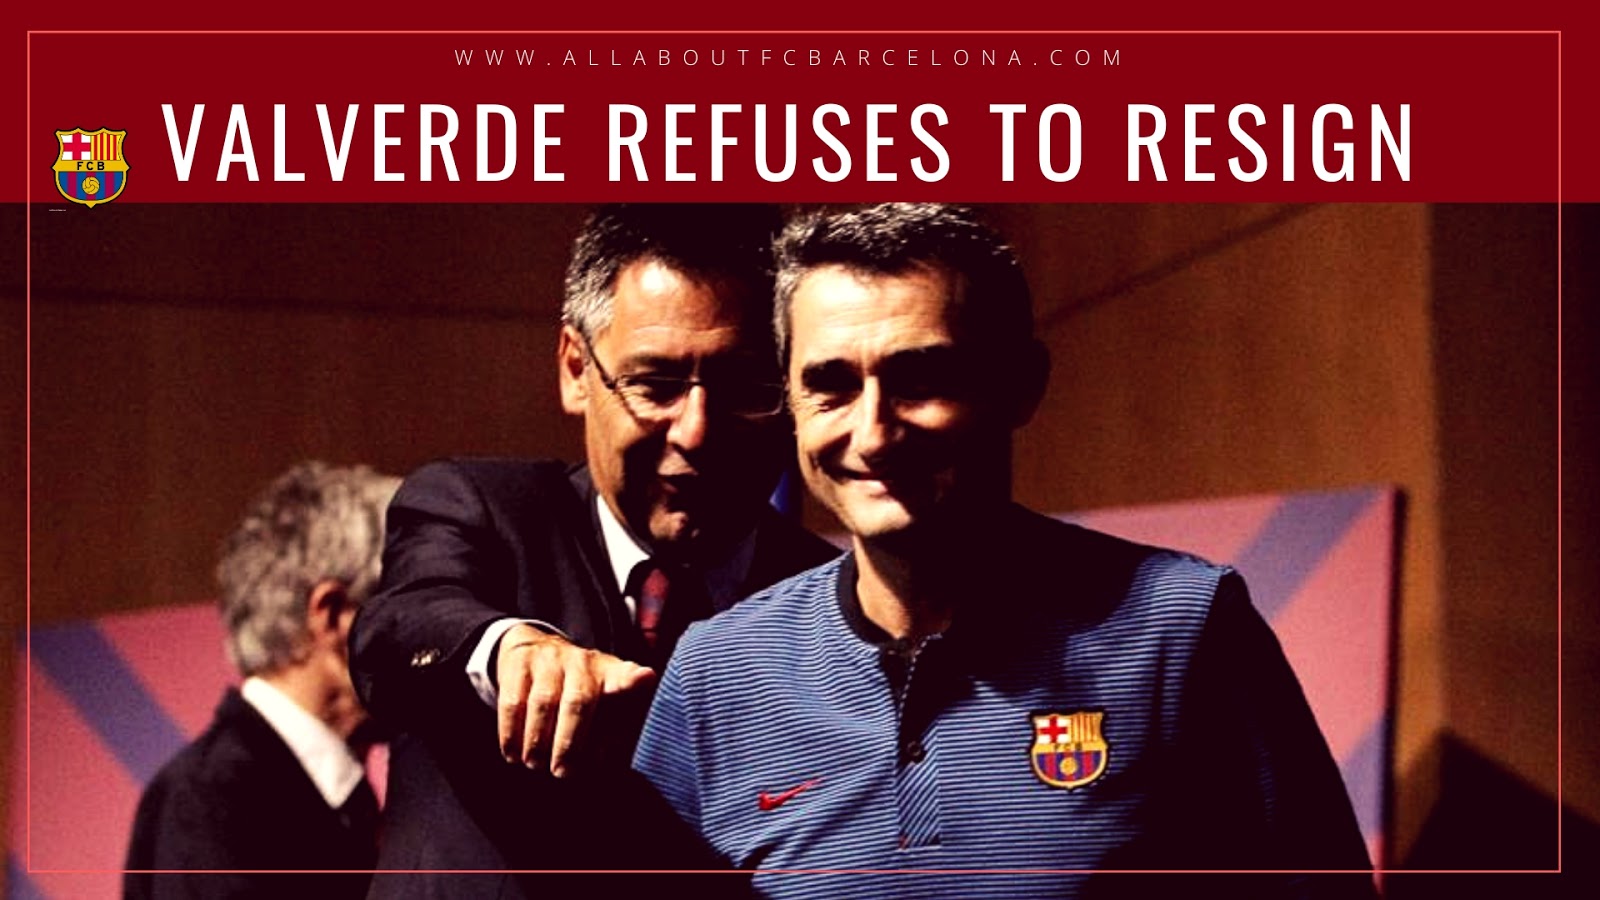 Money Money!! Valverde Refuses to Leave Despite the Absolute Humiliation!